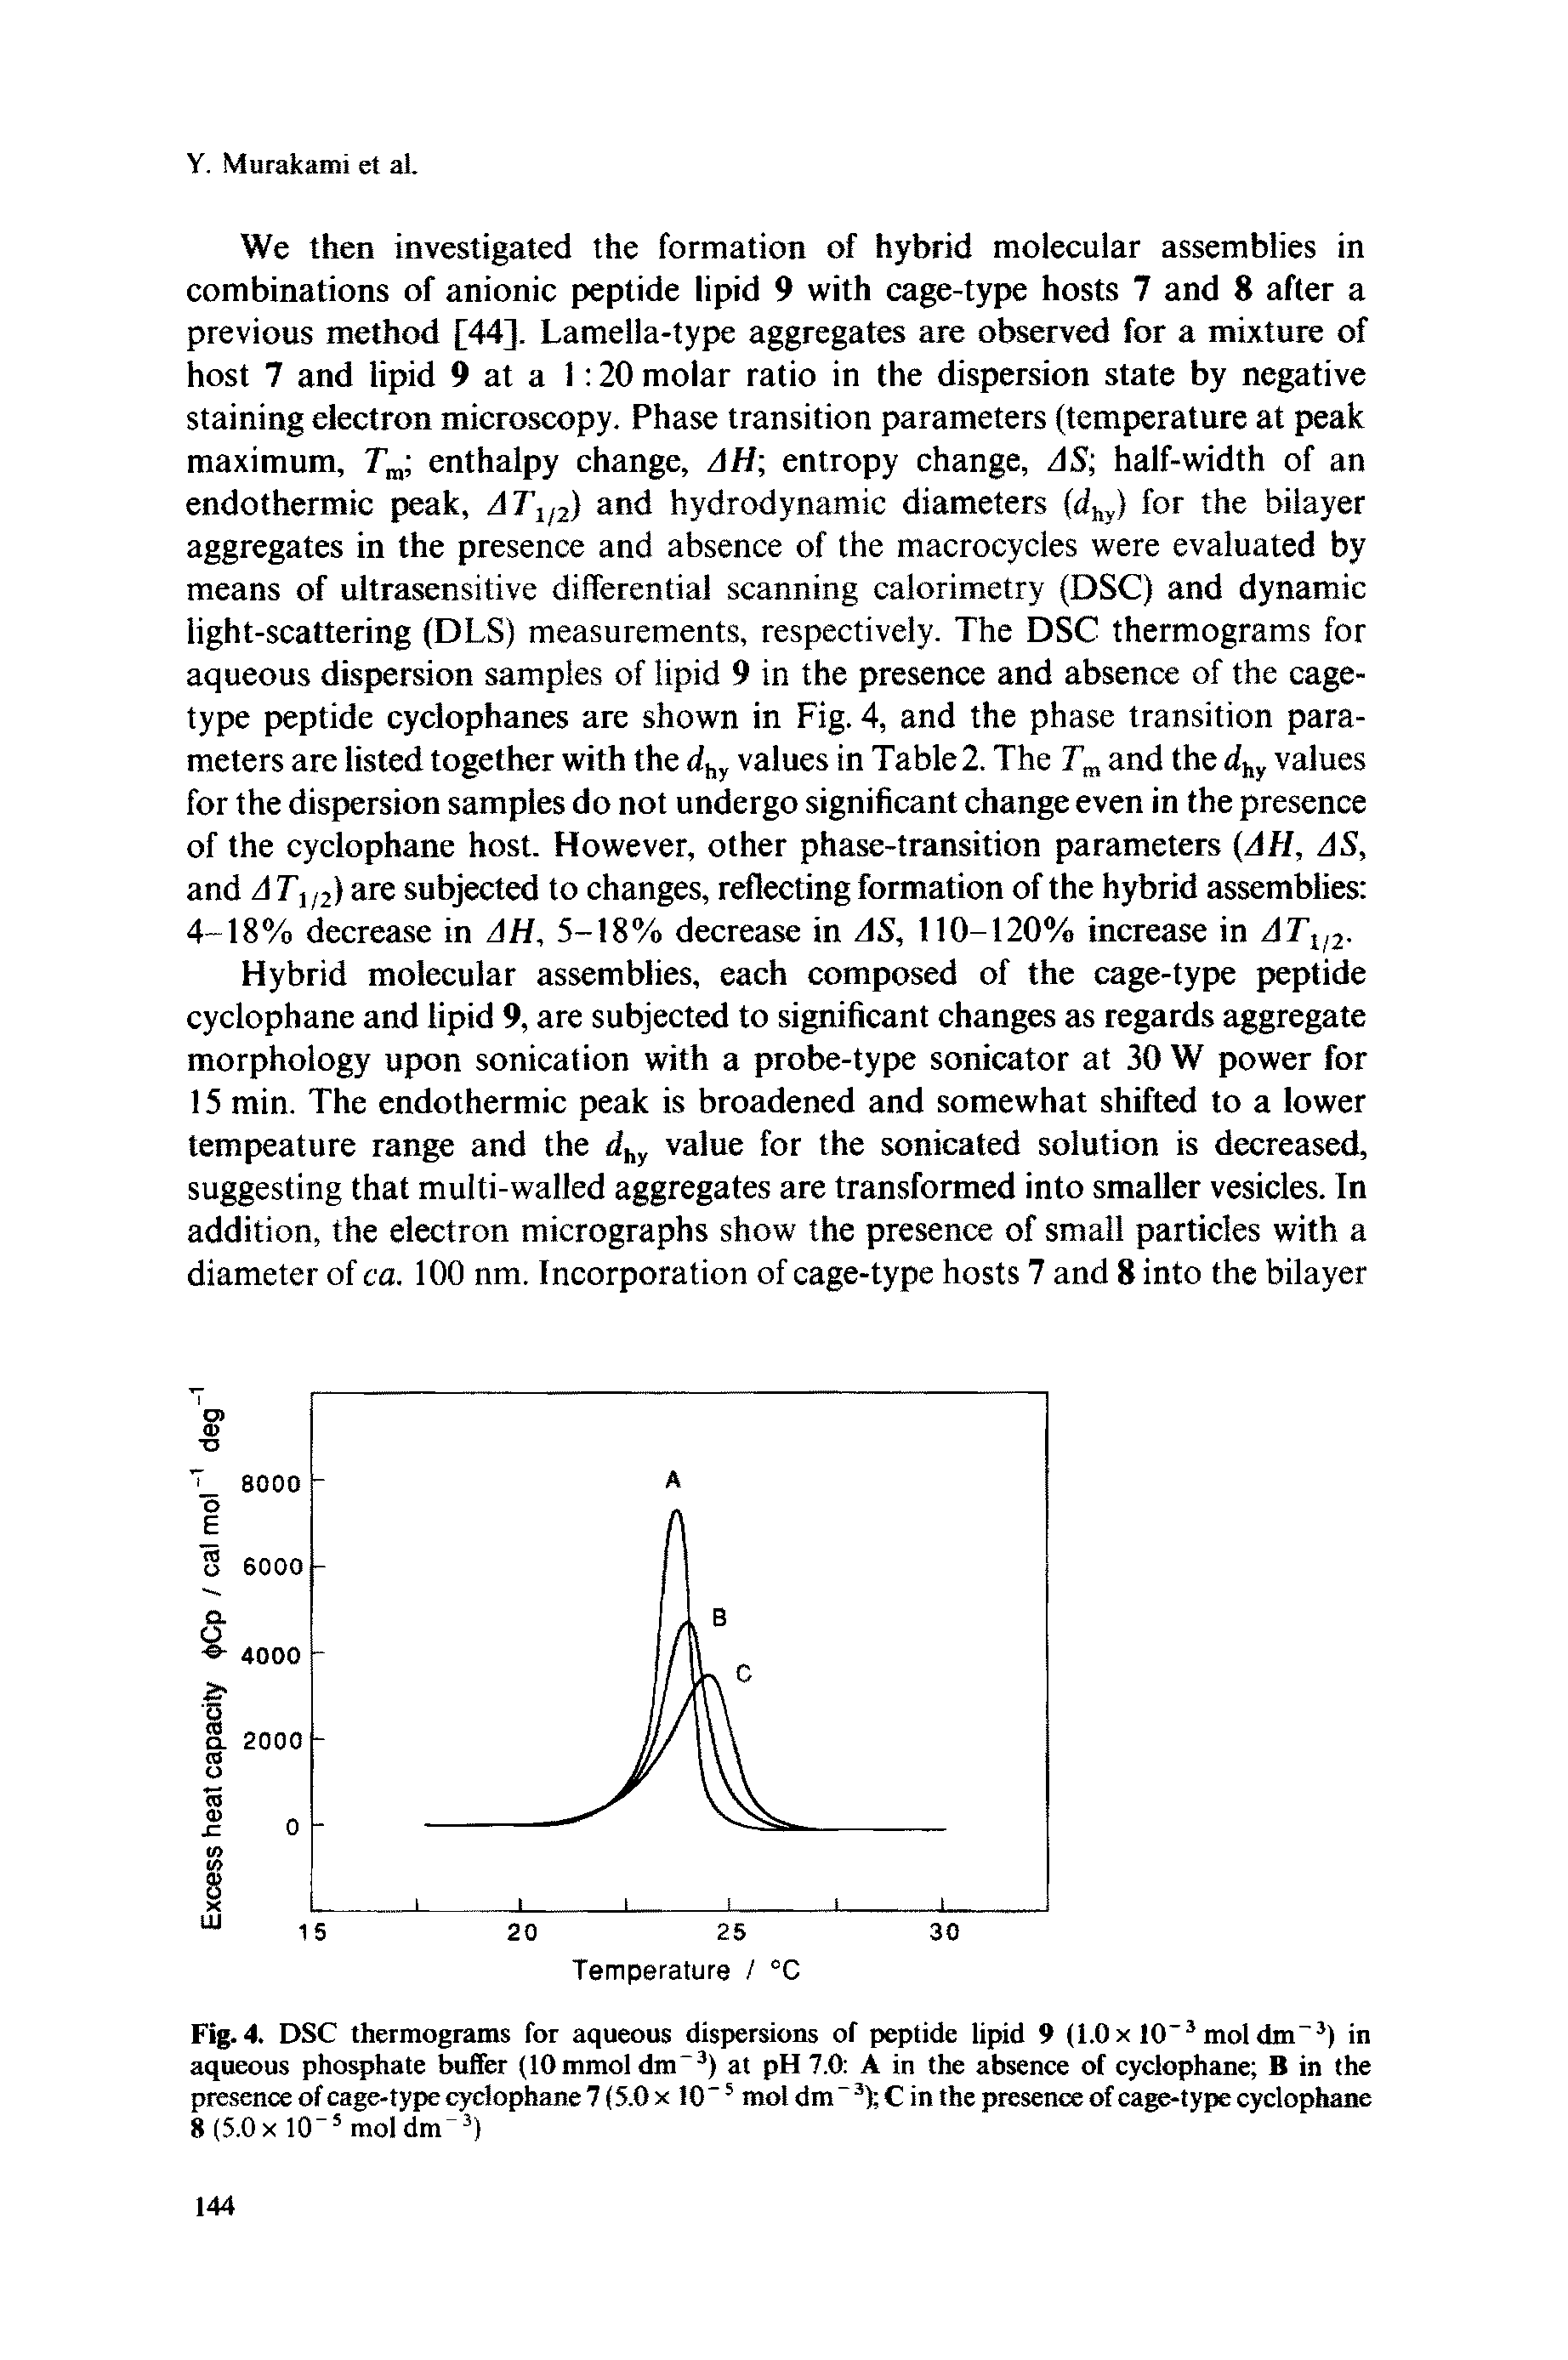 Fig.4. DSC thermograms for aqueous dispersions of peptide lipid 9 (1.0x 10 moldm ) in aqueous phosphate buffer (10 mmol dm ) at pH 7.0 A in the absence of cyclophane B in the presence of cage-type cyclophane 7 (5.0 x 10 mol dm C in the presence of cage-type cyclophane 8 (5.0 X 10 mol dm )...